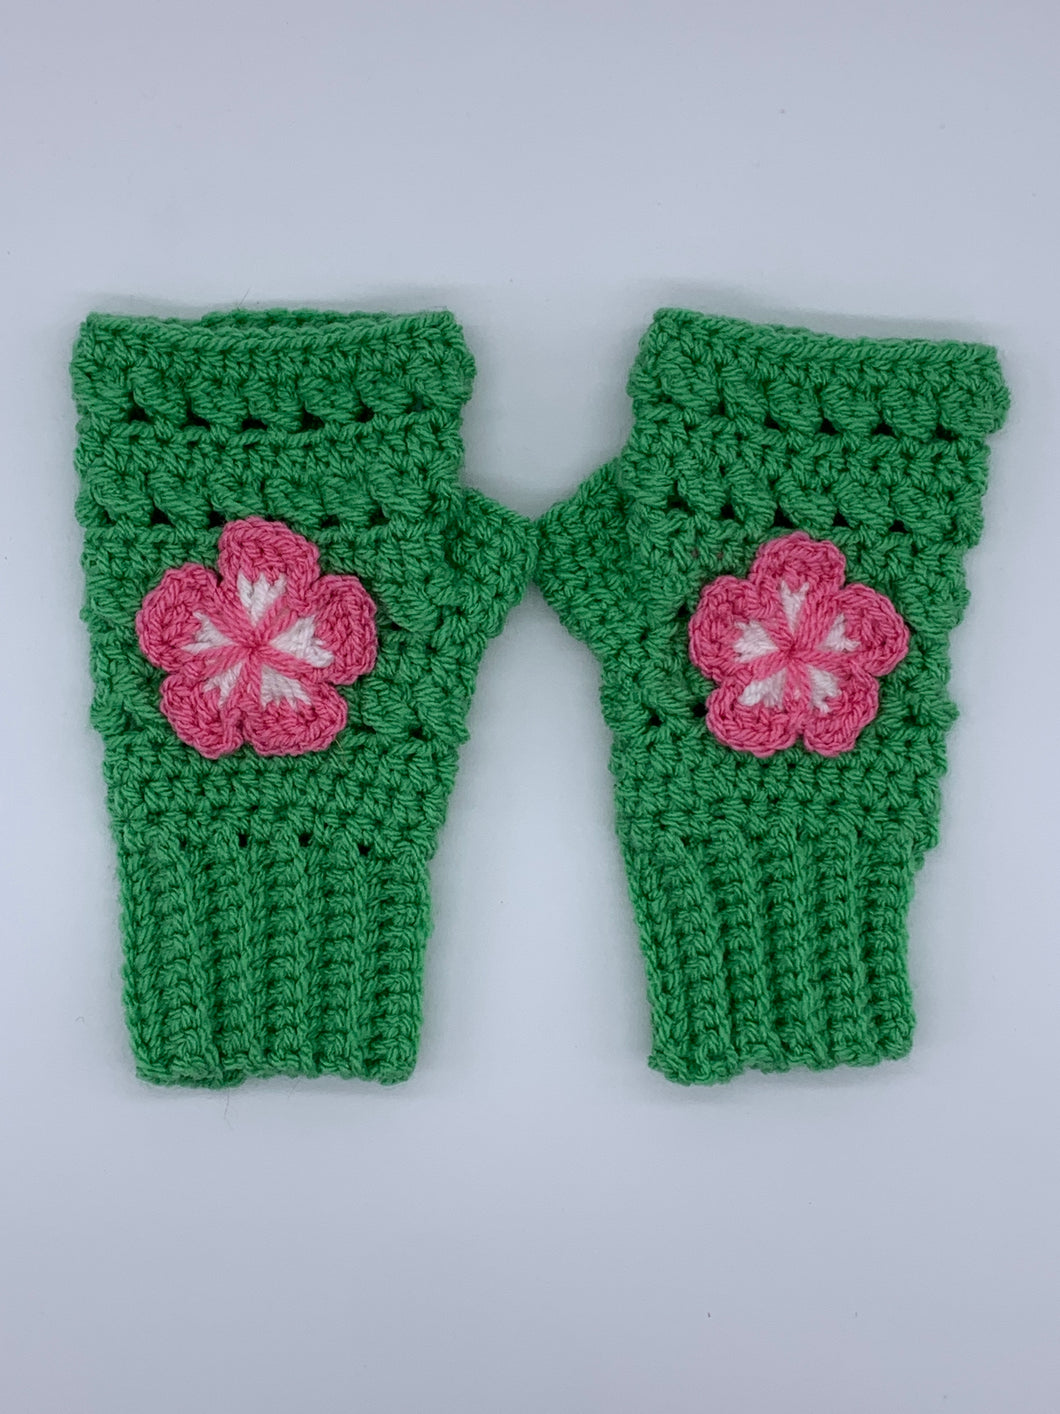 Lily pad fingerless gloves - one size